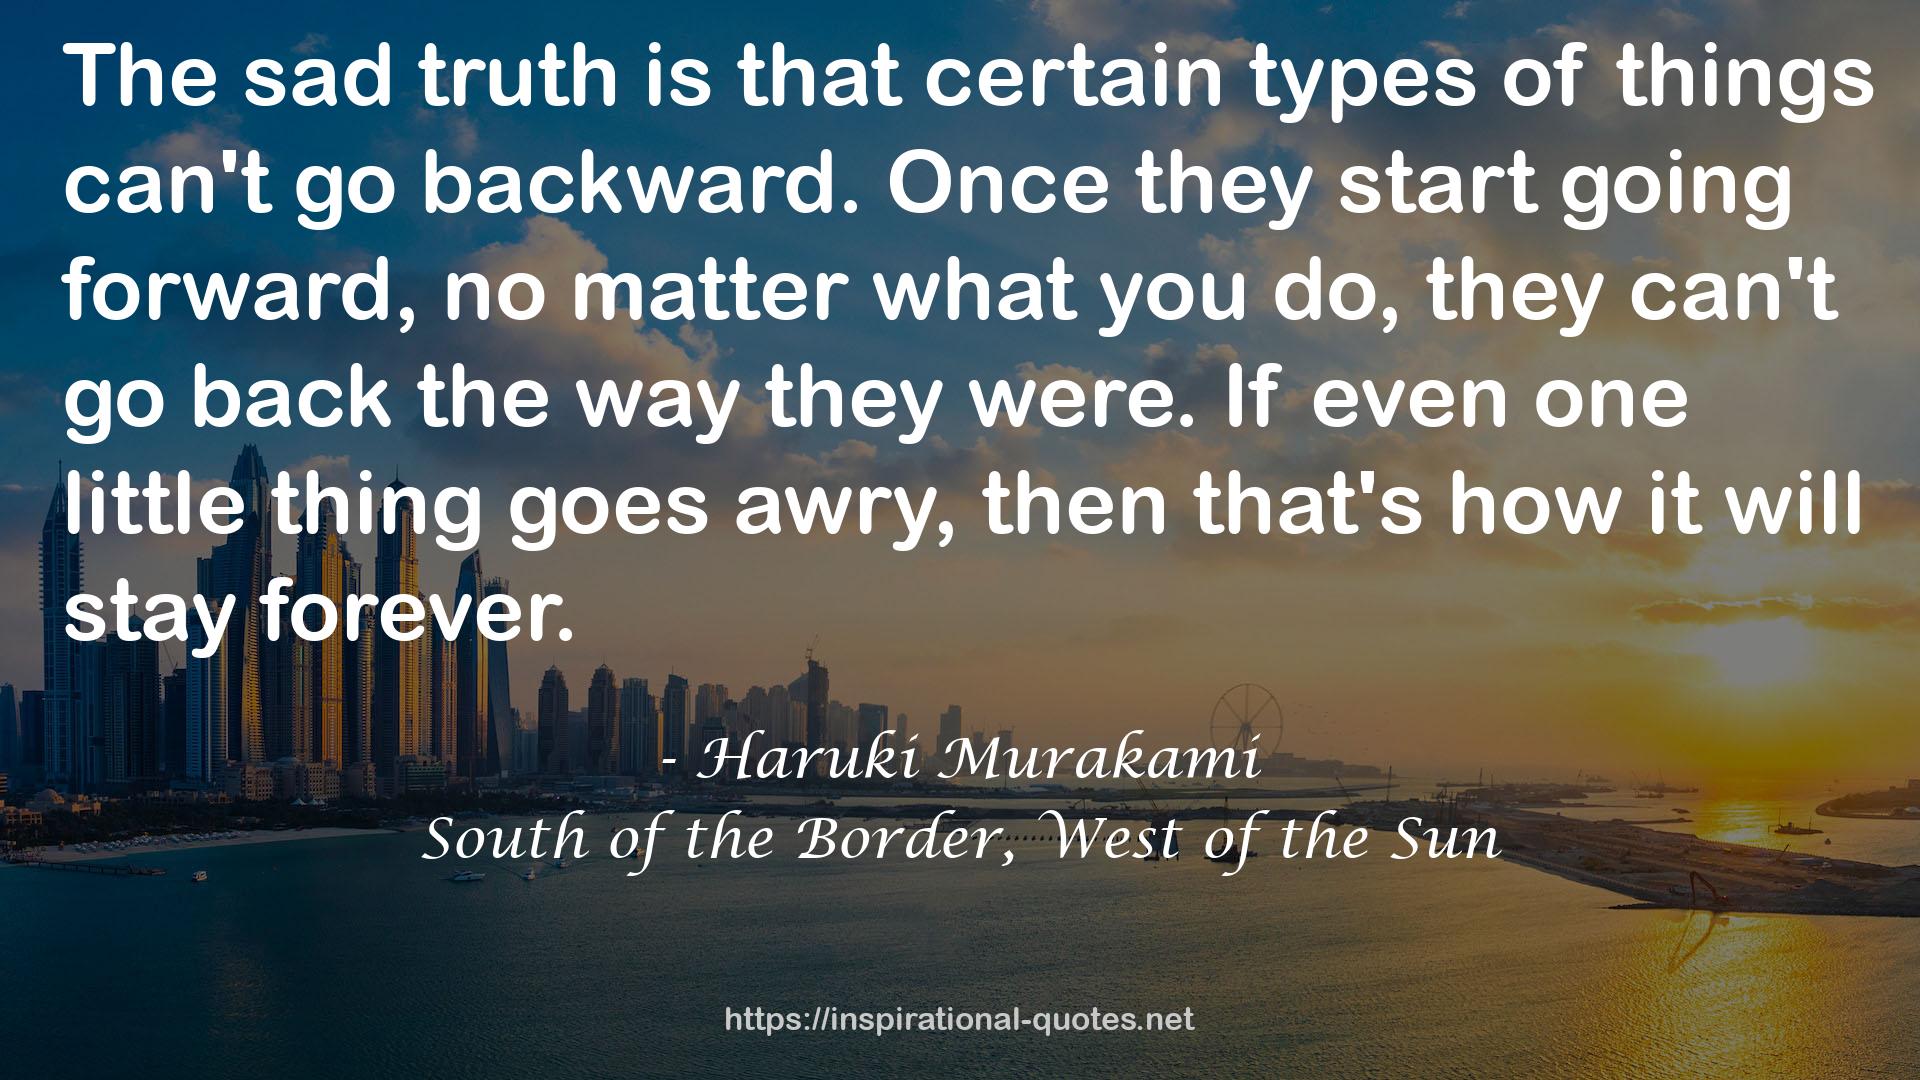 South of the Border, West of the Sun QUOTES